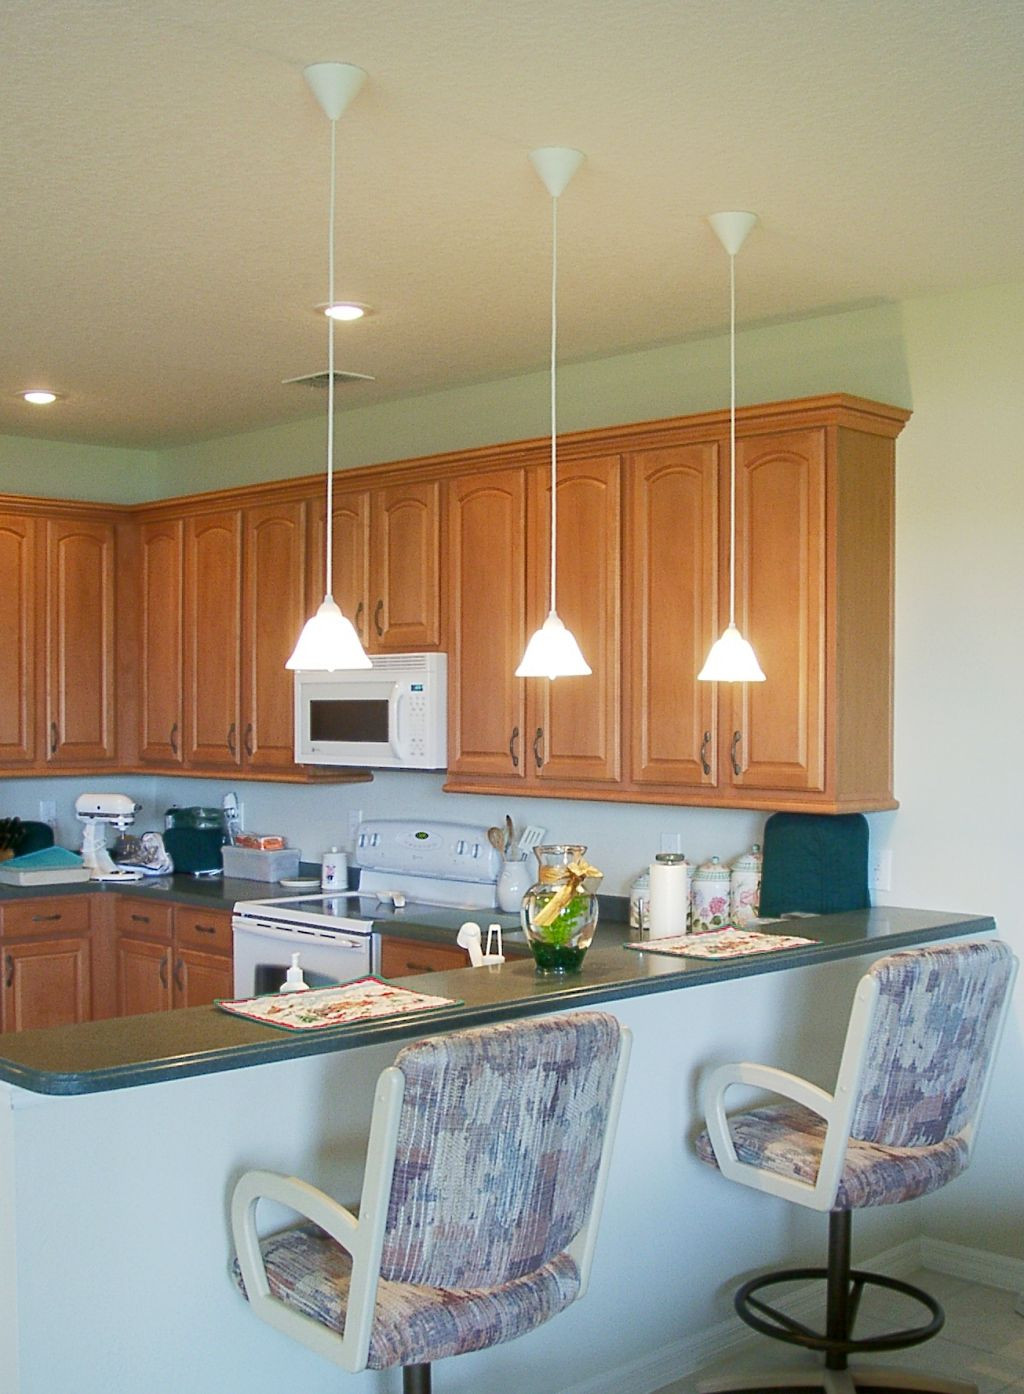 Hanging Lights Over Kitchen Island
 low hanging mini pendant lights over kitchen island for an